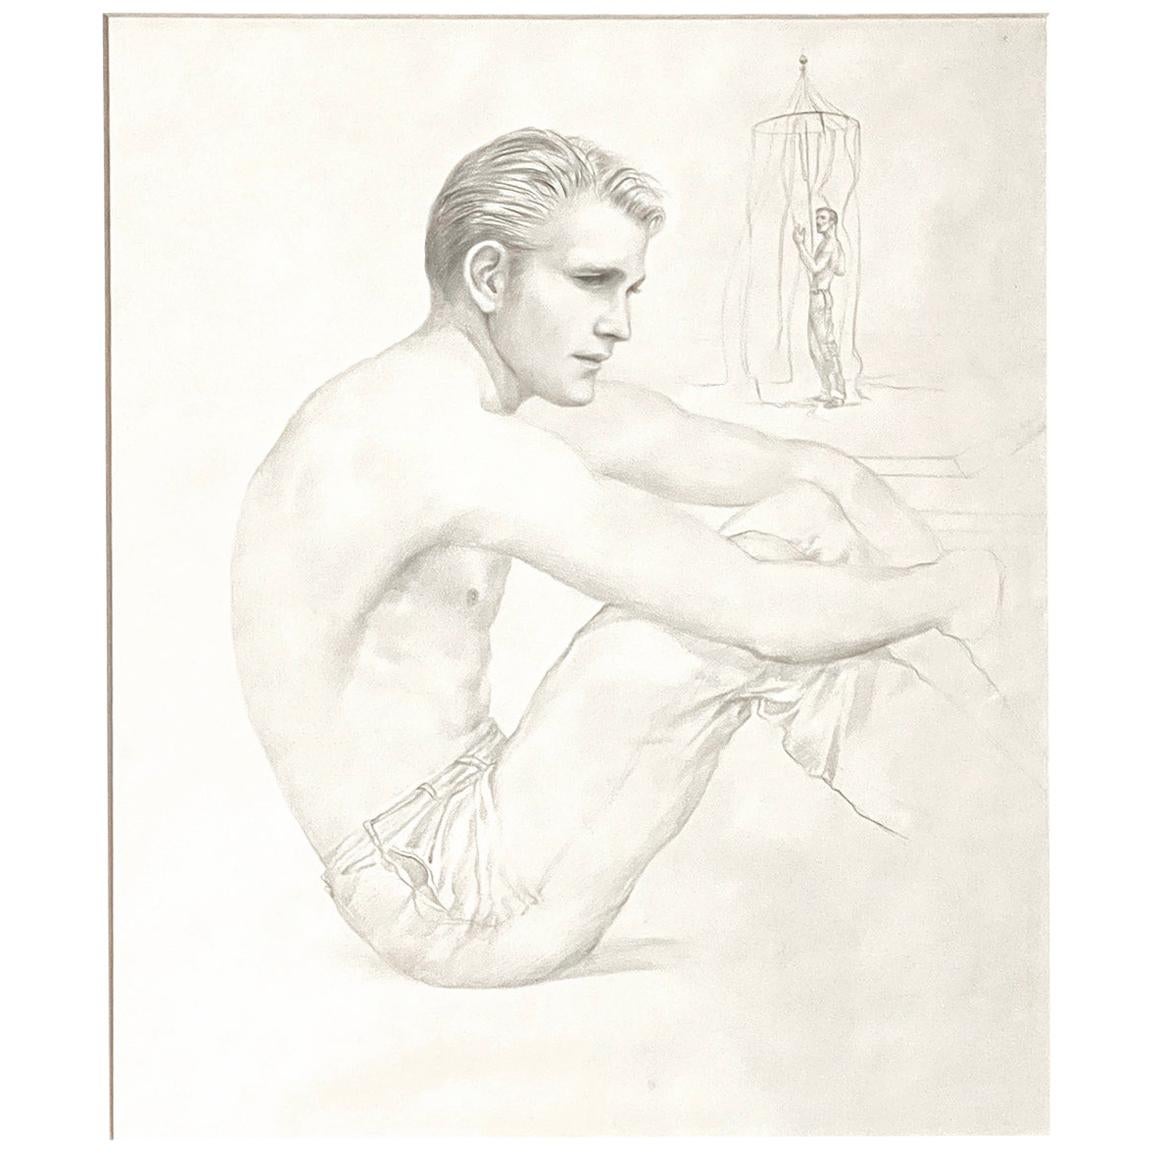 "Seated Male Figure, Beachside, " Early Drawing by John B. Lear with Cabana